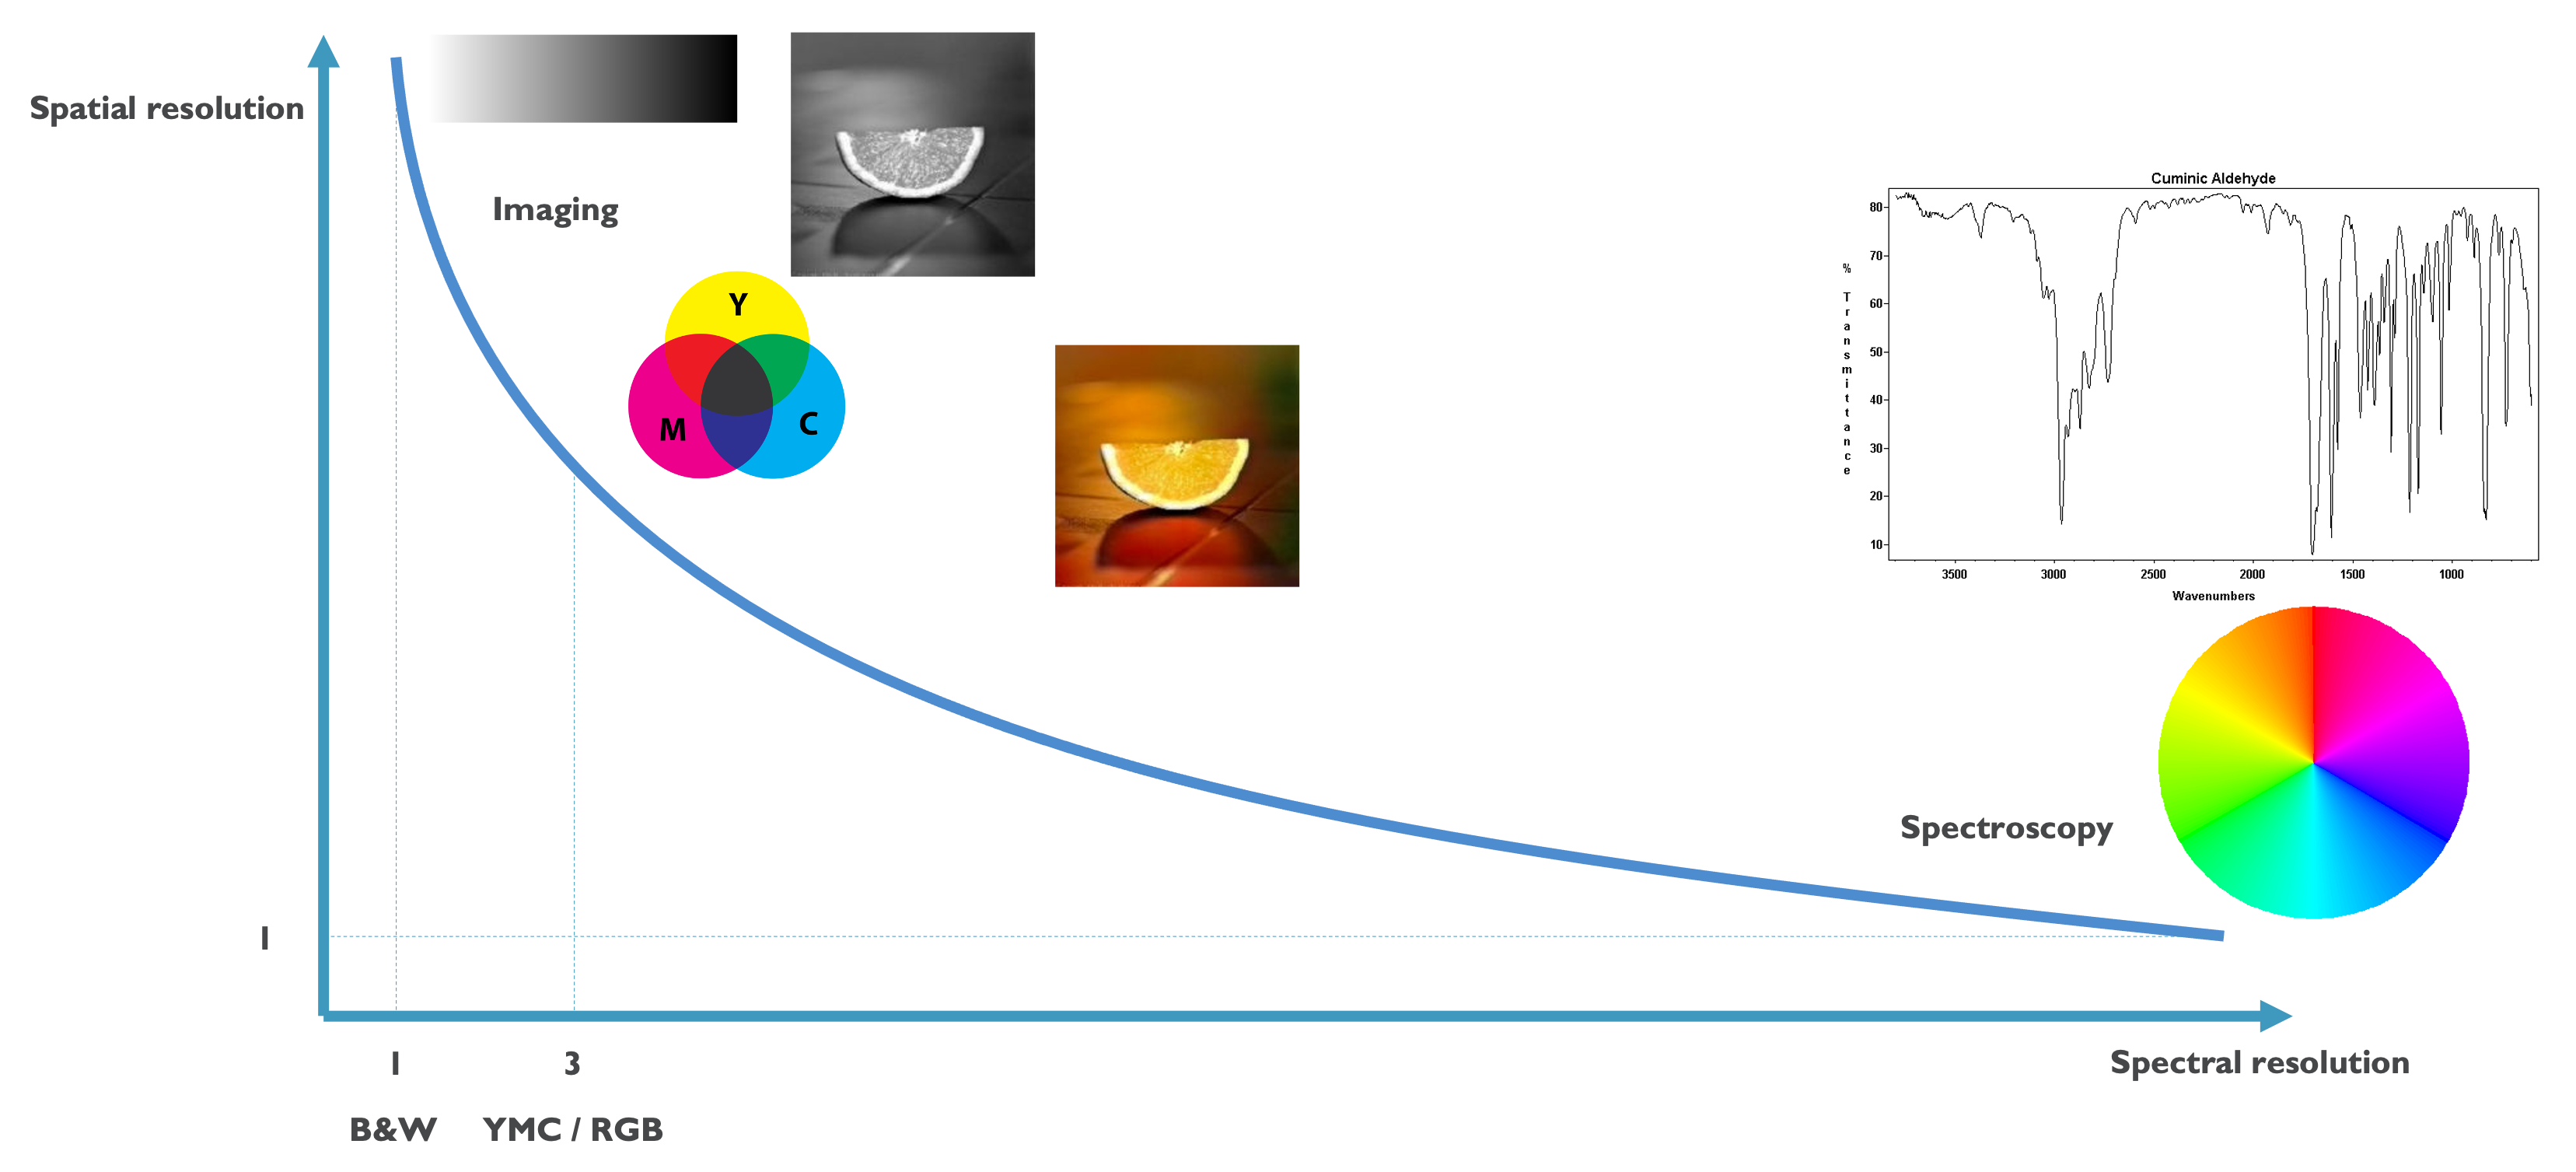 Figure 1 Imaging versus spectroscopy. While imaging explores a larger area in a few spectral components (blue, red, yellow), spectroscopy visualizes the whole spectral signature of one component.